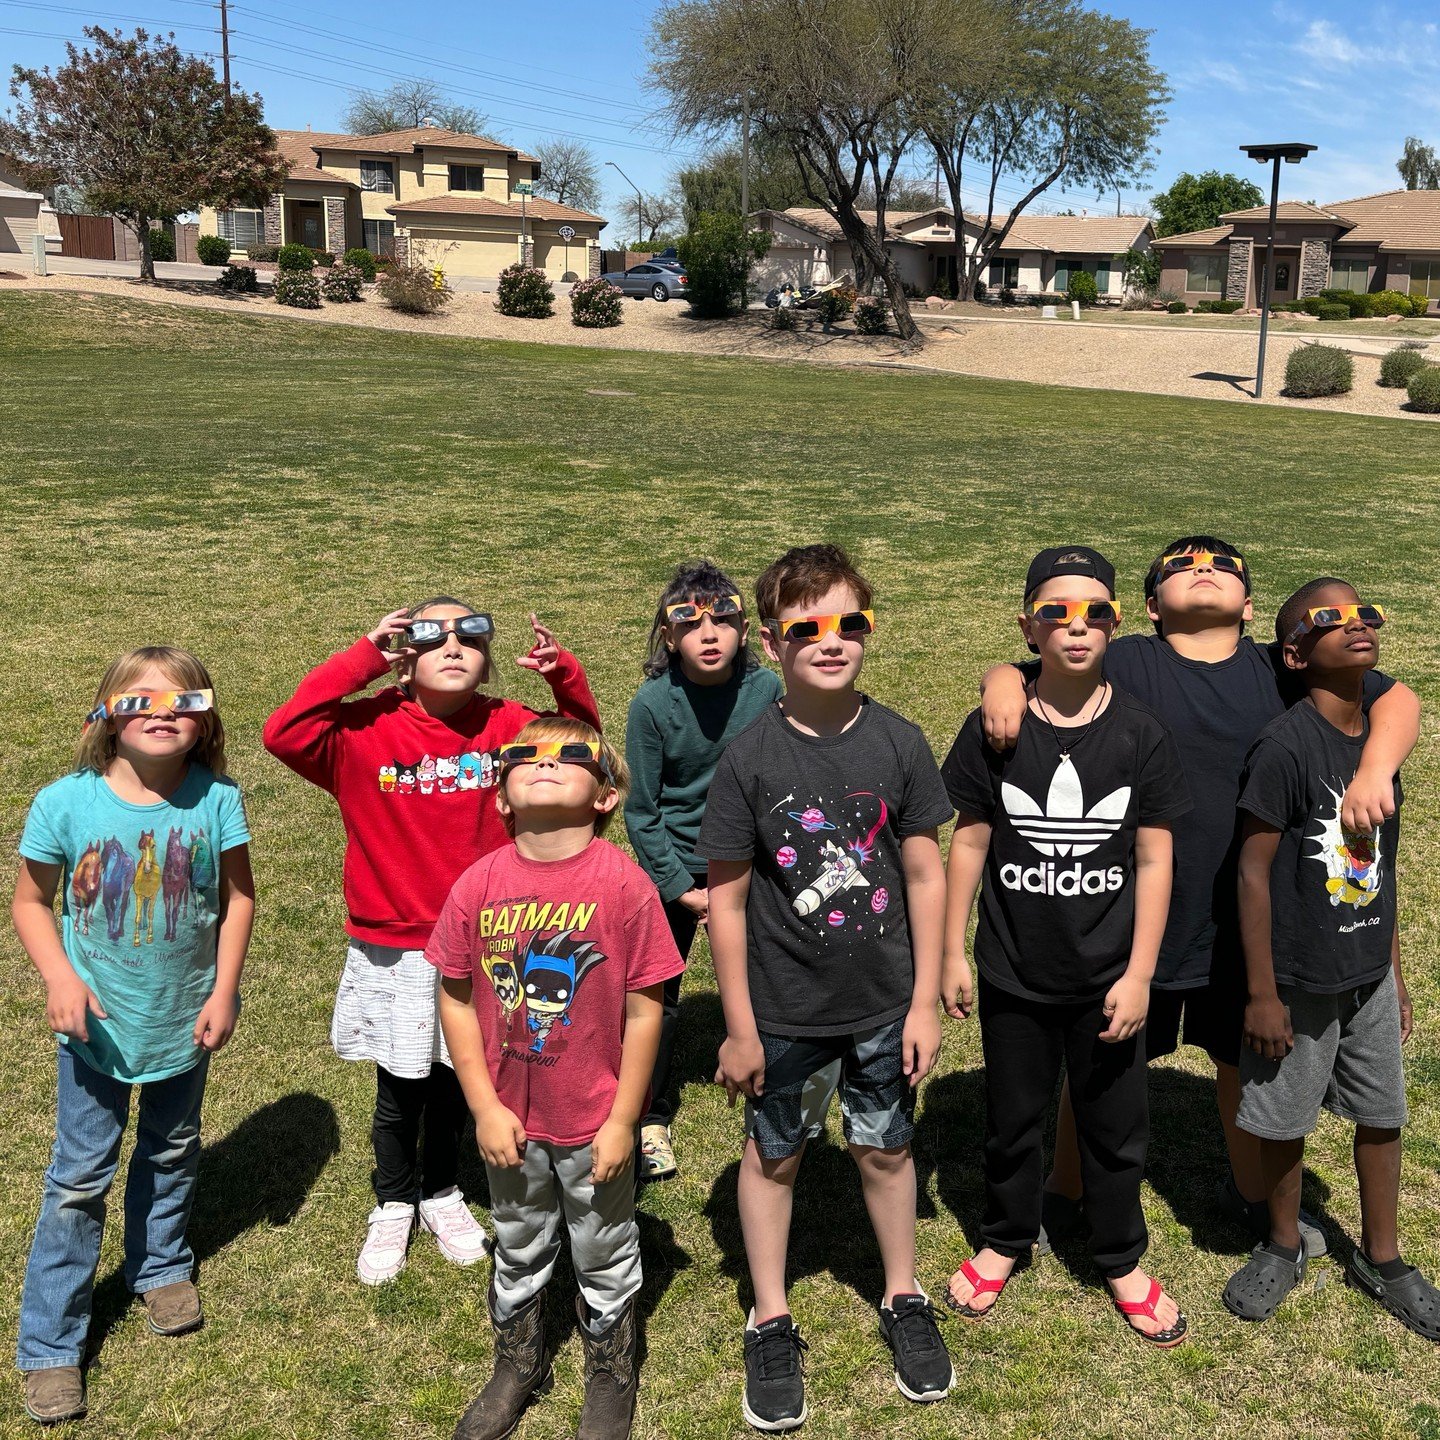 Solar Eclipse! 
Based on the energy these kiddos brought today, it may as well have been a full moon! 🤣
I loved getting to share this experience with them, though! And it came at such a perfect time as we are currently studying Astronomy and the inc